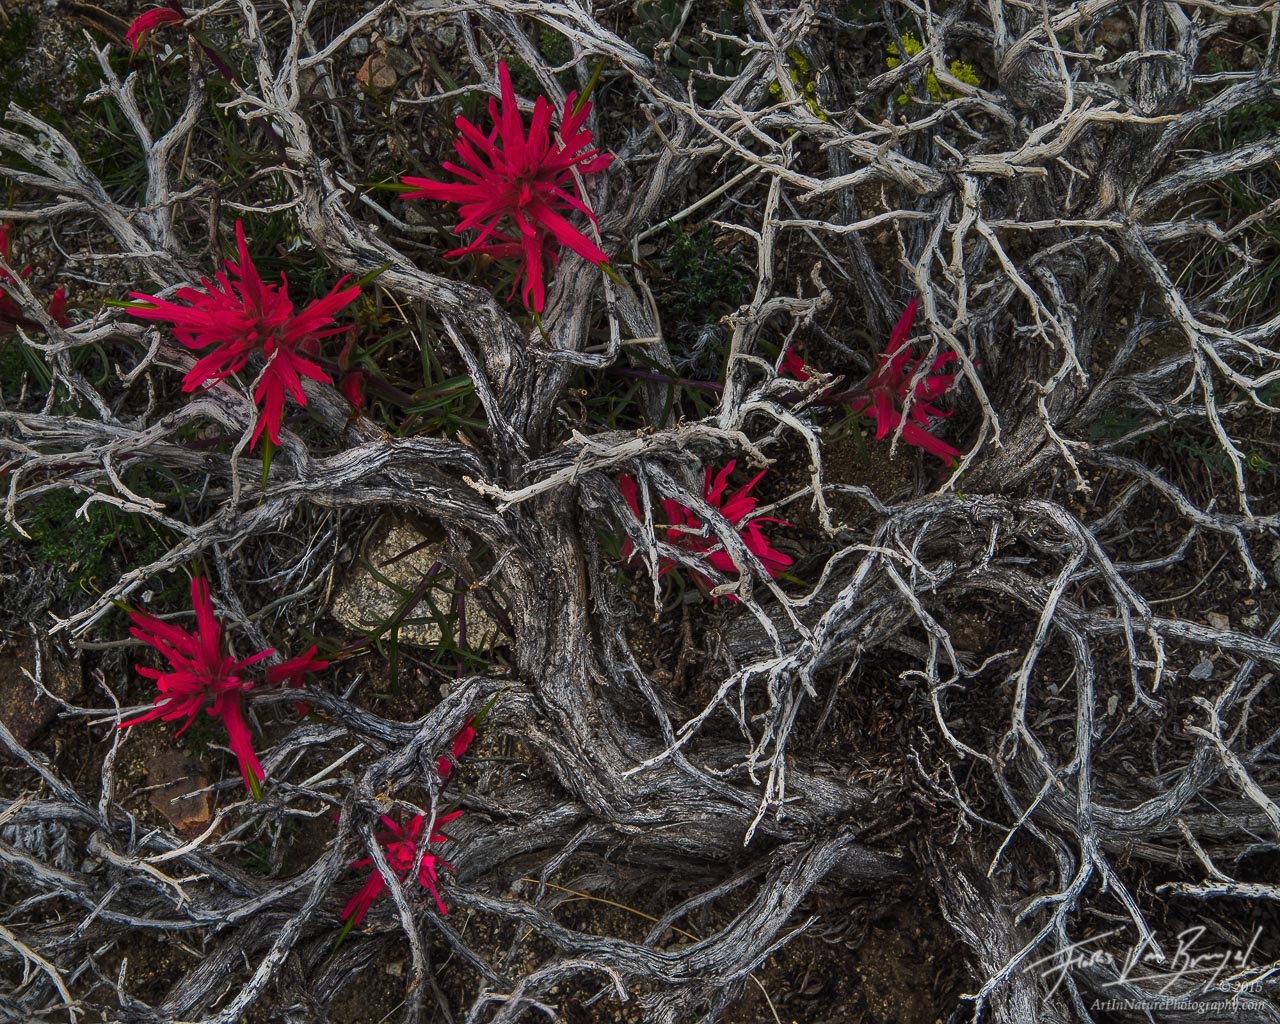 Paintbrush blooms in the unlikely heart of a withered sage brush in California's White Mountains, poetically illustrating the...